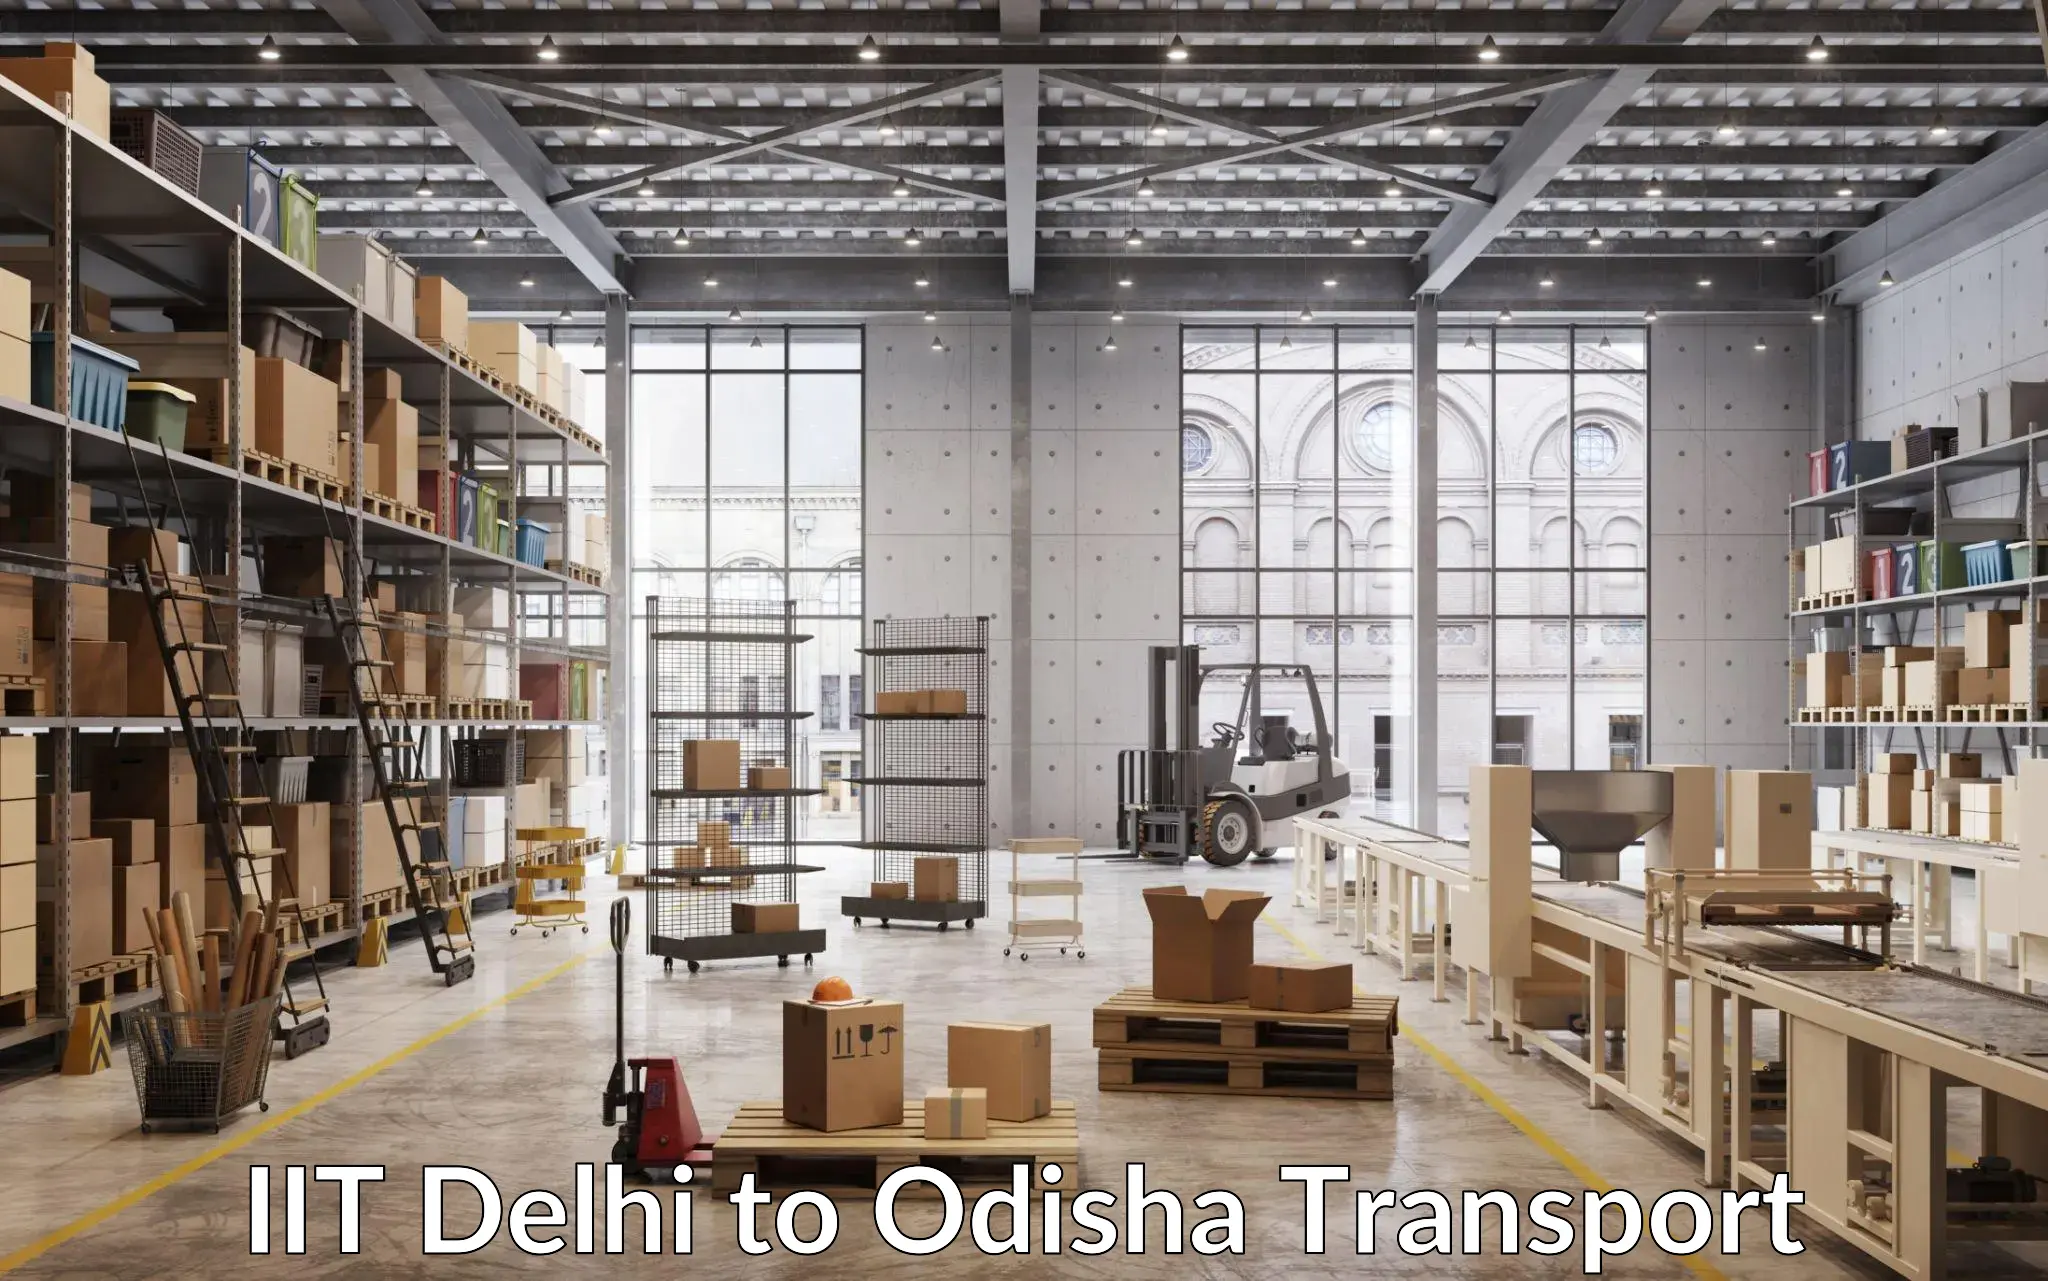 Transport bike from one state to another IIT Delhi to Dukura